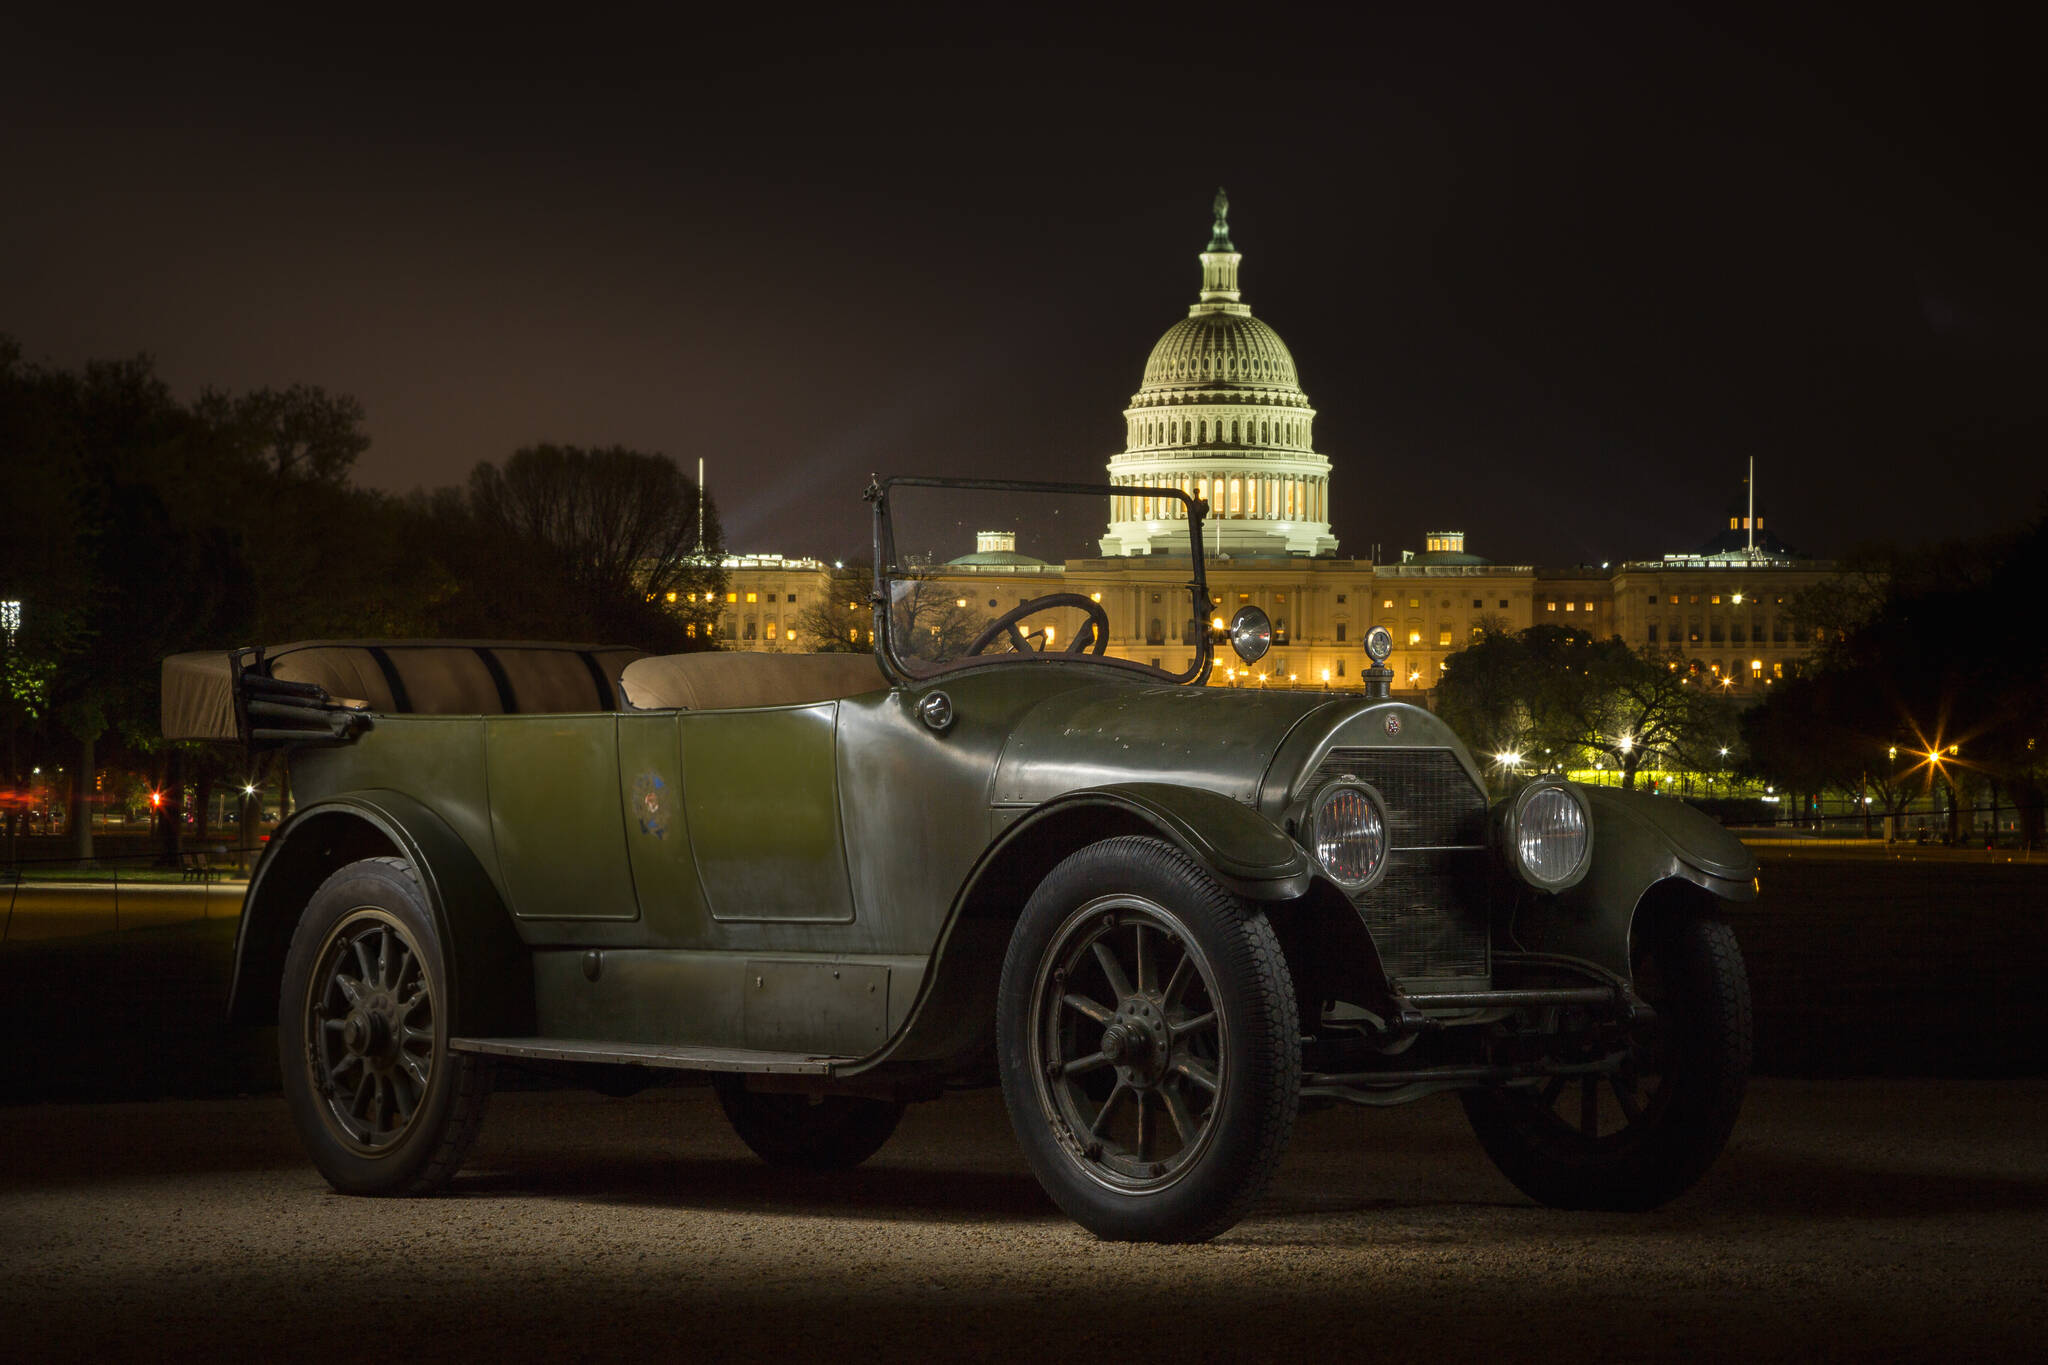 Marc Lassen’s 1918 Cadillac may be the only complete and largely unrestored Word War I military Cadillac that recorded military service in World War I. (Hagerty Drivers Foundation)